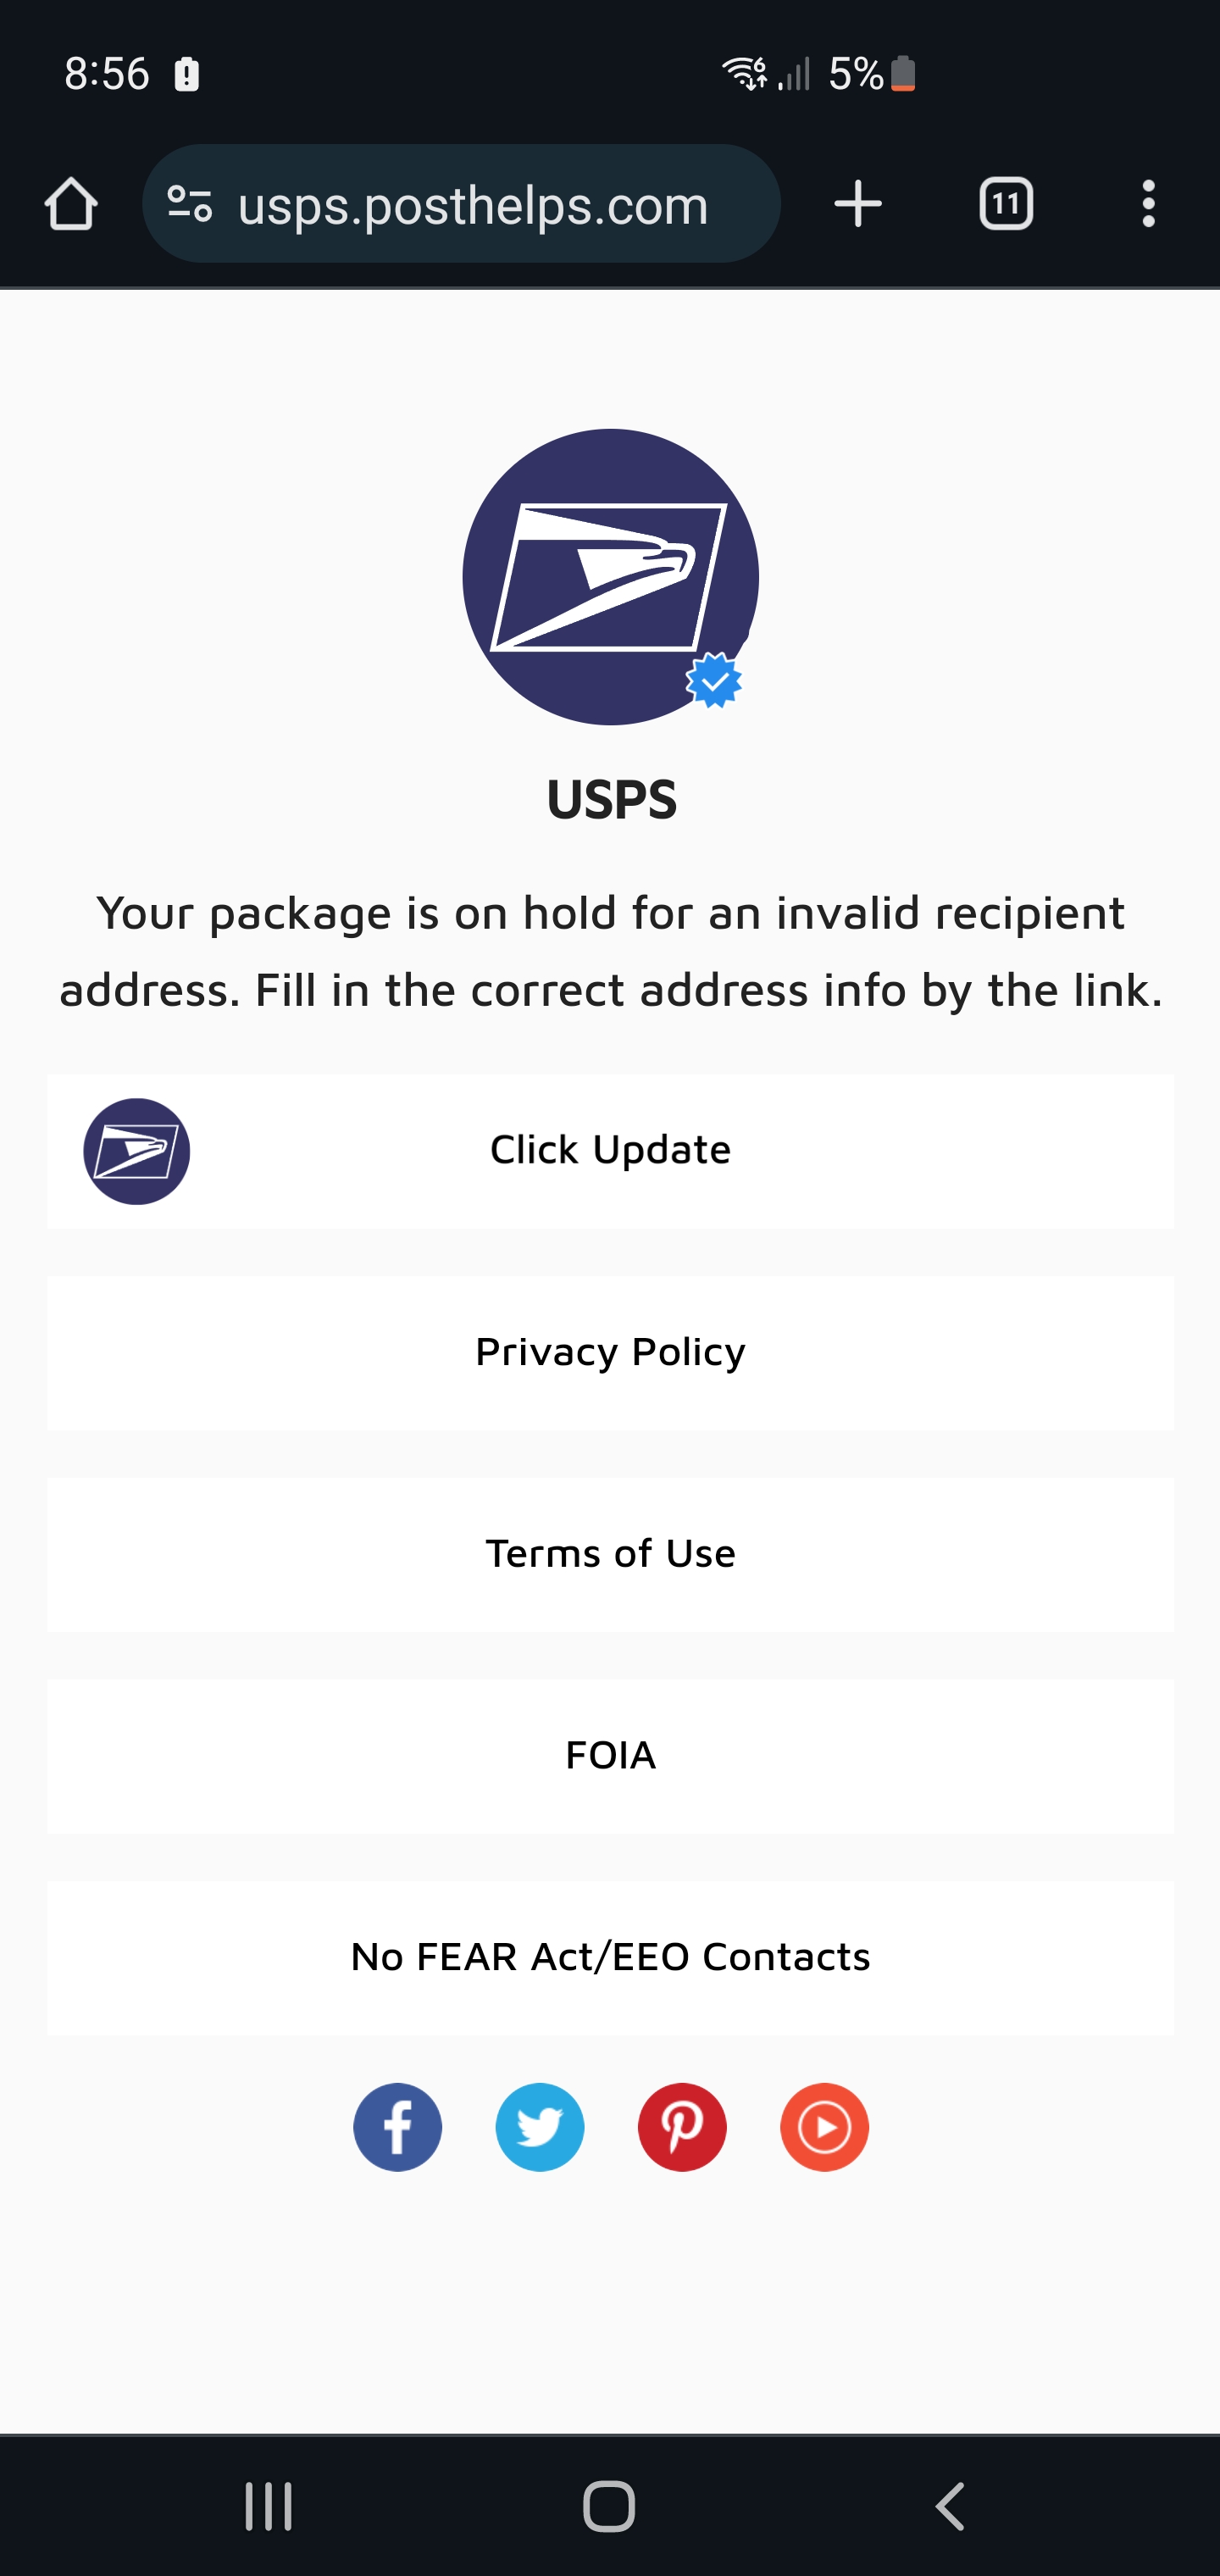 USPS.PostHelps at usps.posthelps.com